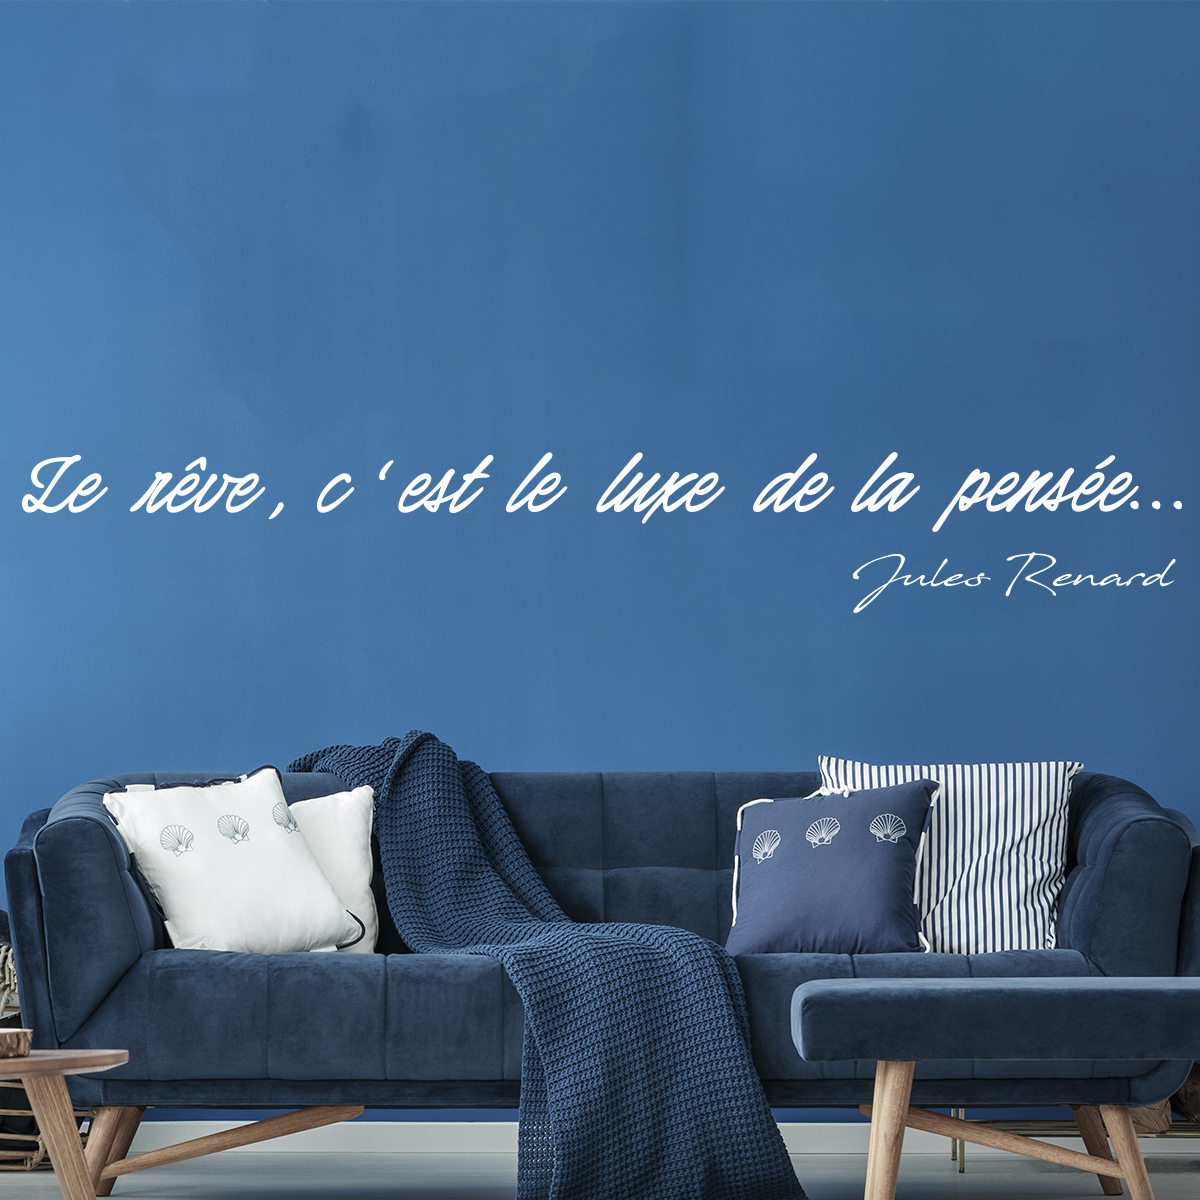 Quote Wall Decal Le Reve C Est Le Luxe De La Pensee Jules Renard Wall Decals Quote Wall Stickers French Ambiance Sticker